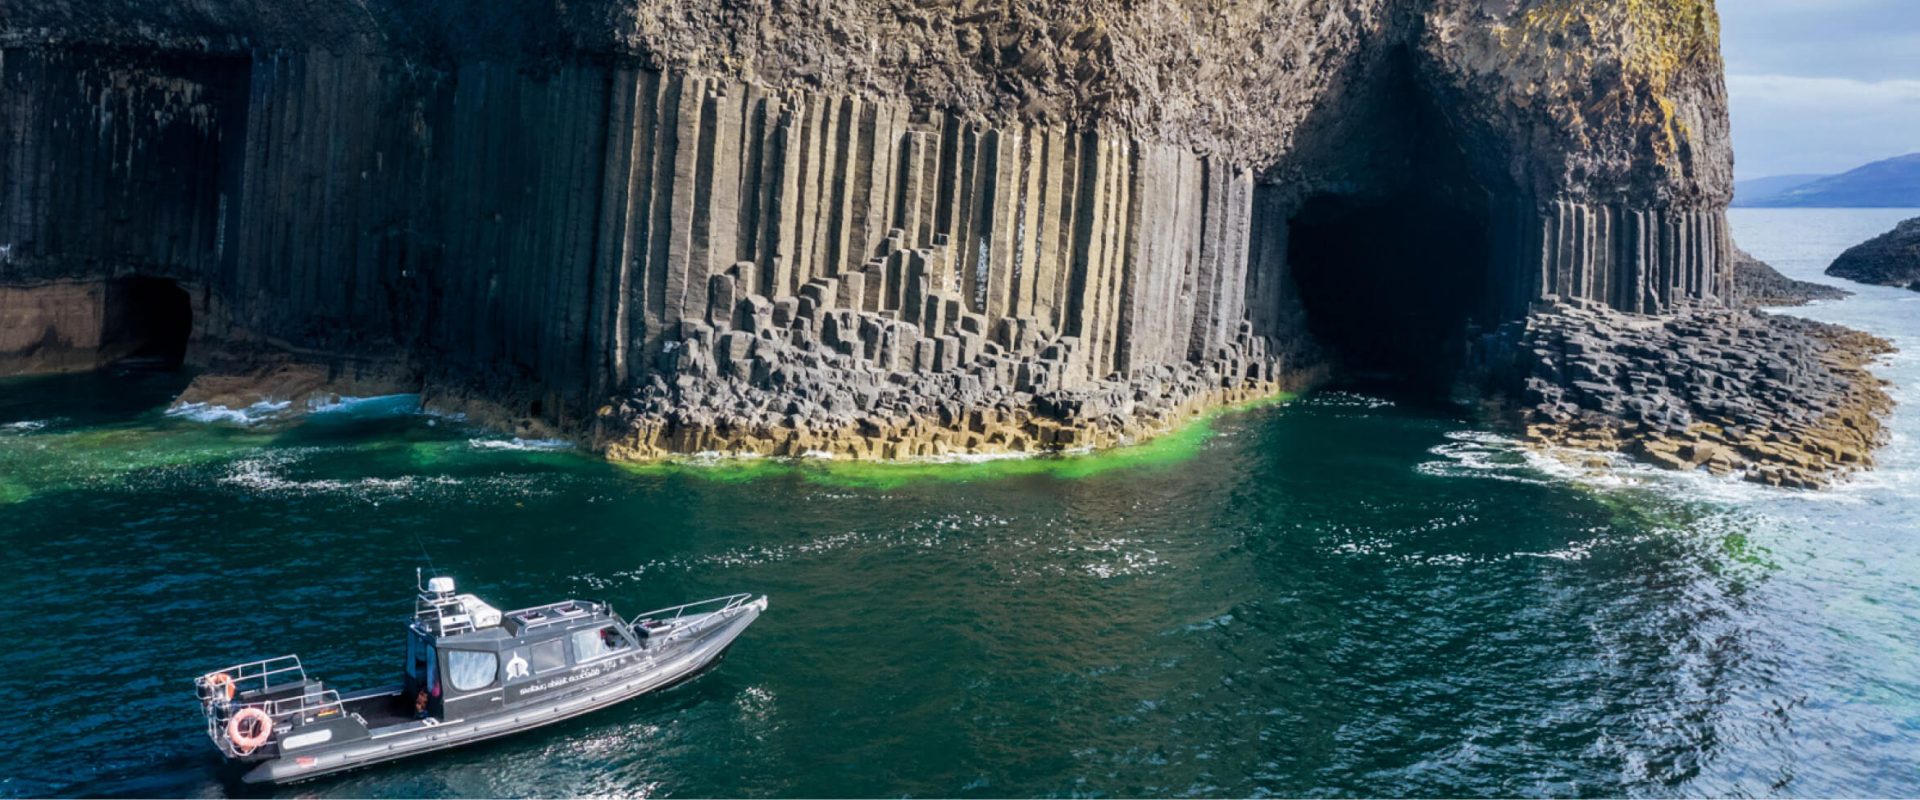 Swimming Fingal's cave